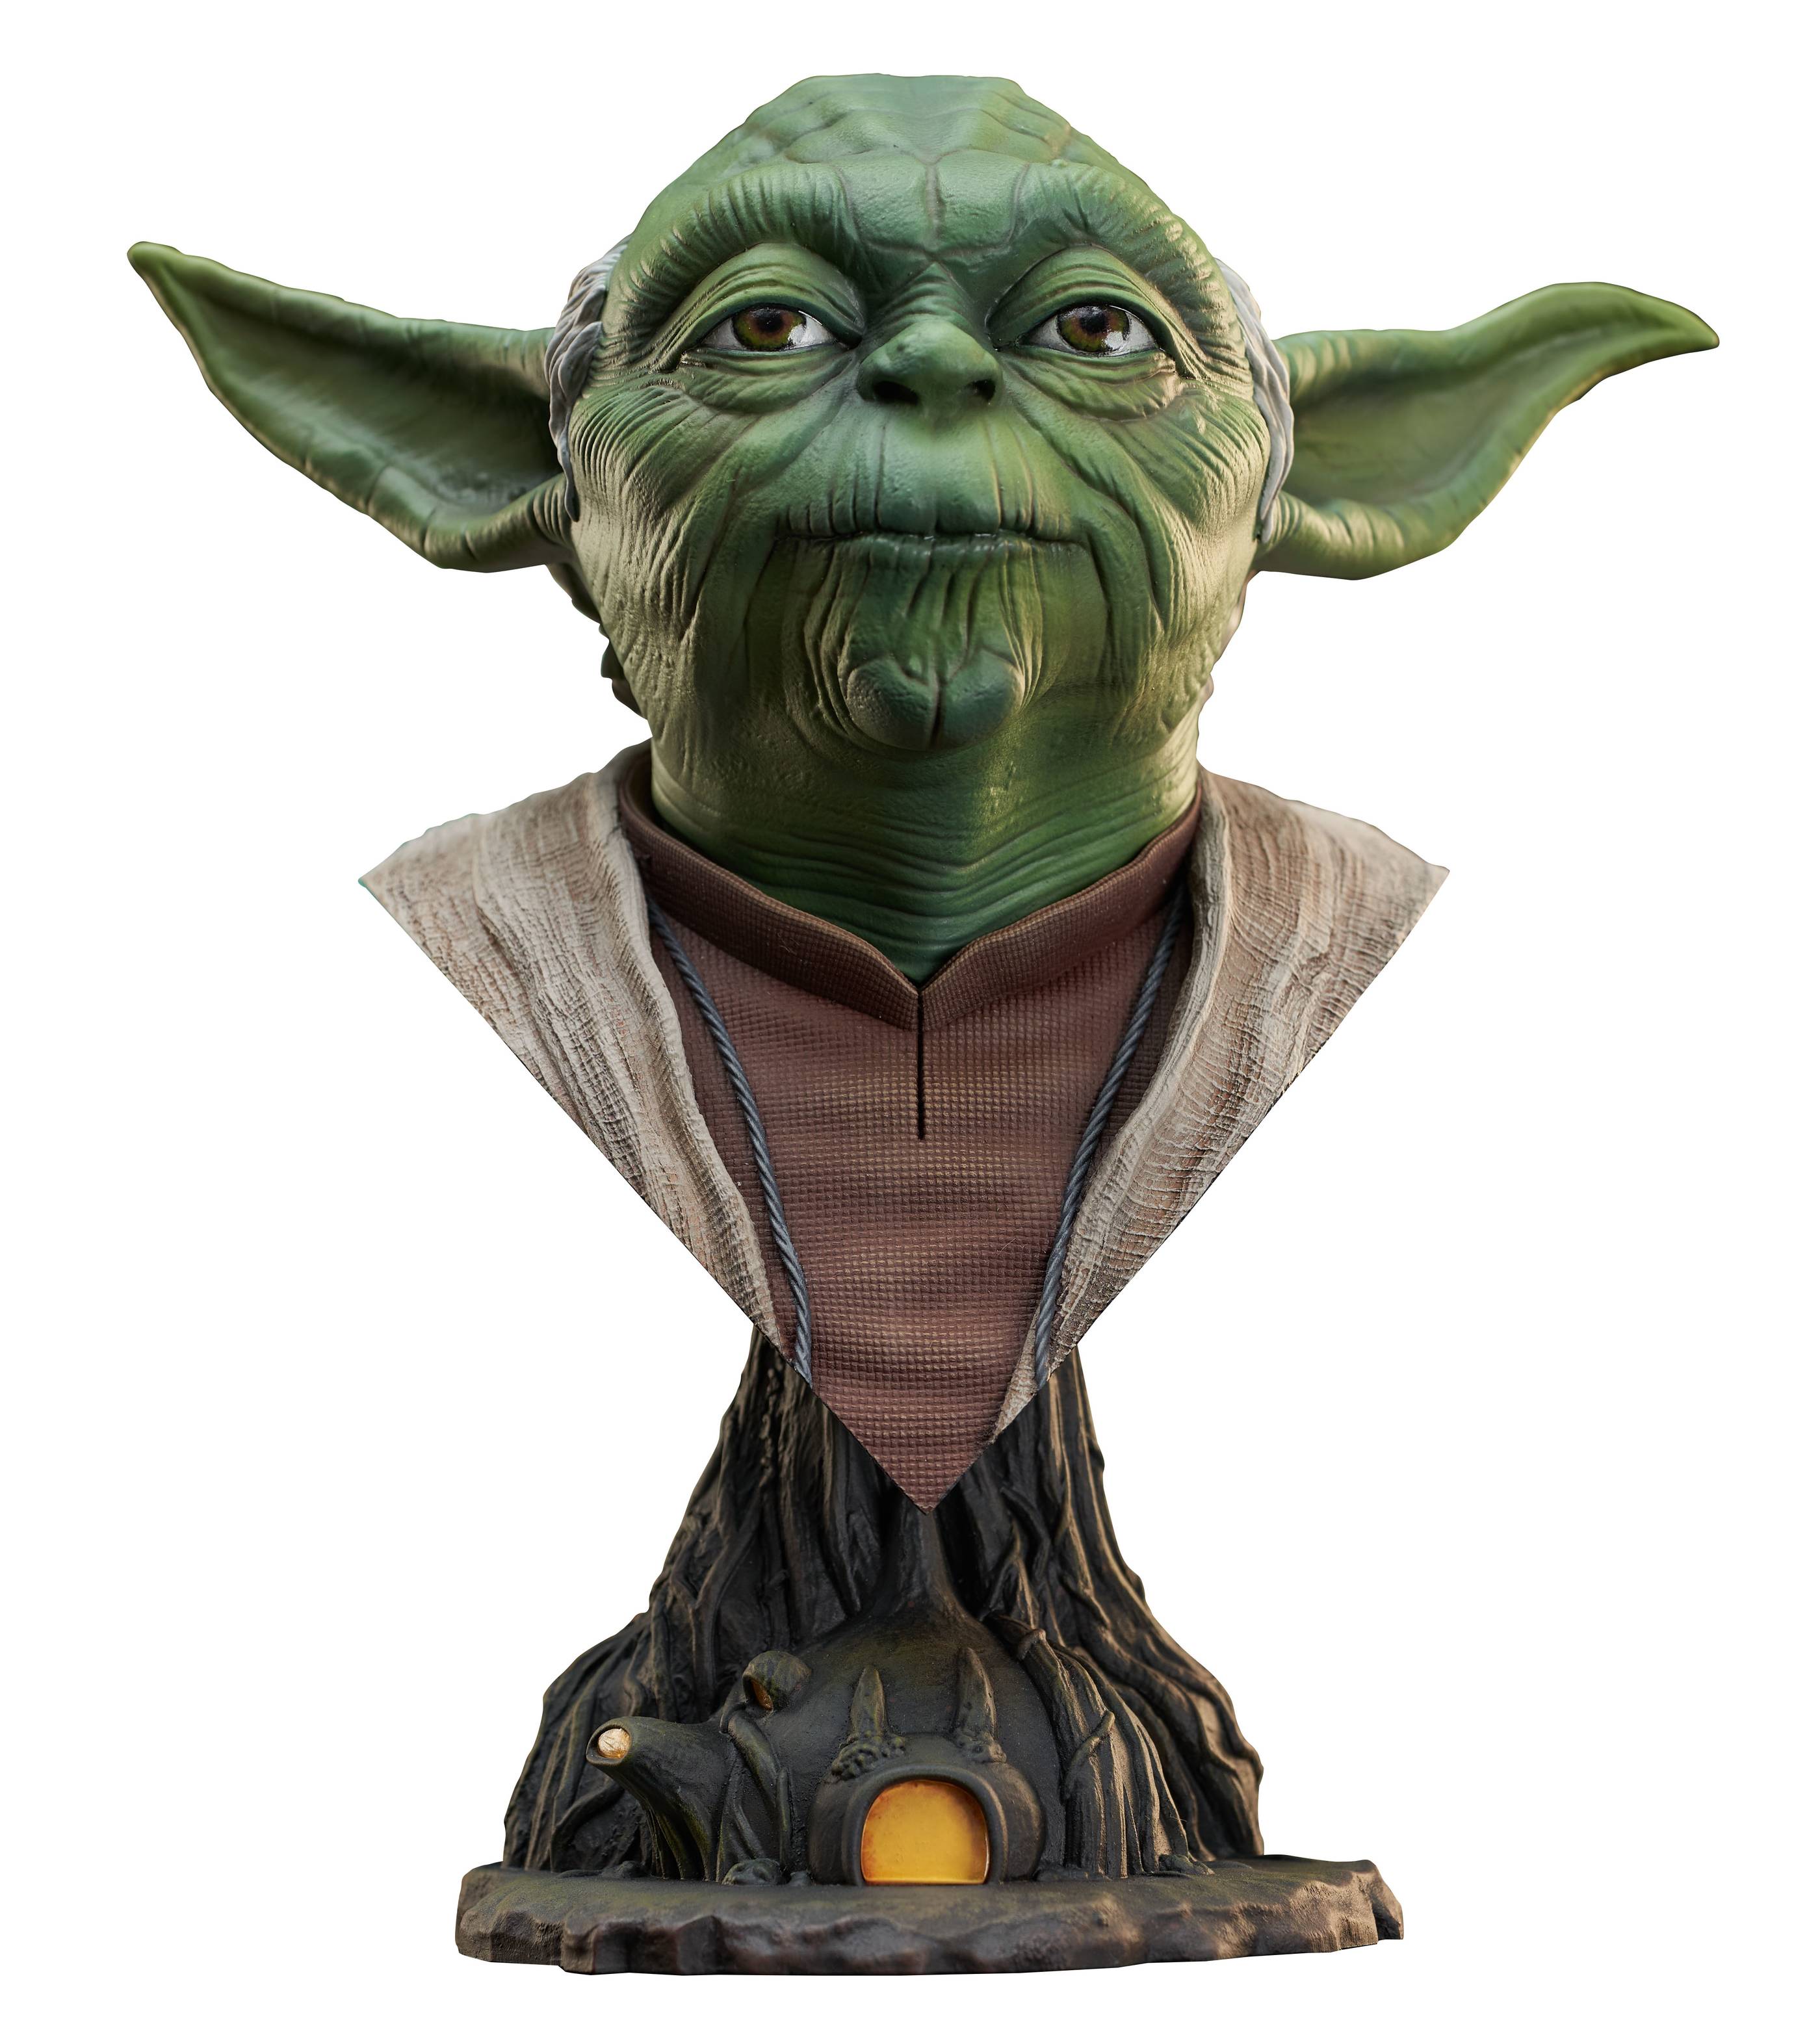 STAR WARS EMPIRE STRIKES BACK L3D YODA 1/2 SCALE BUST